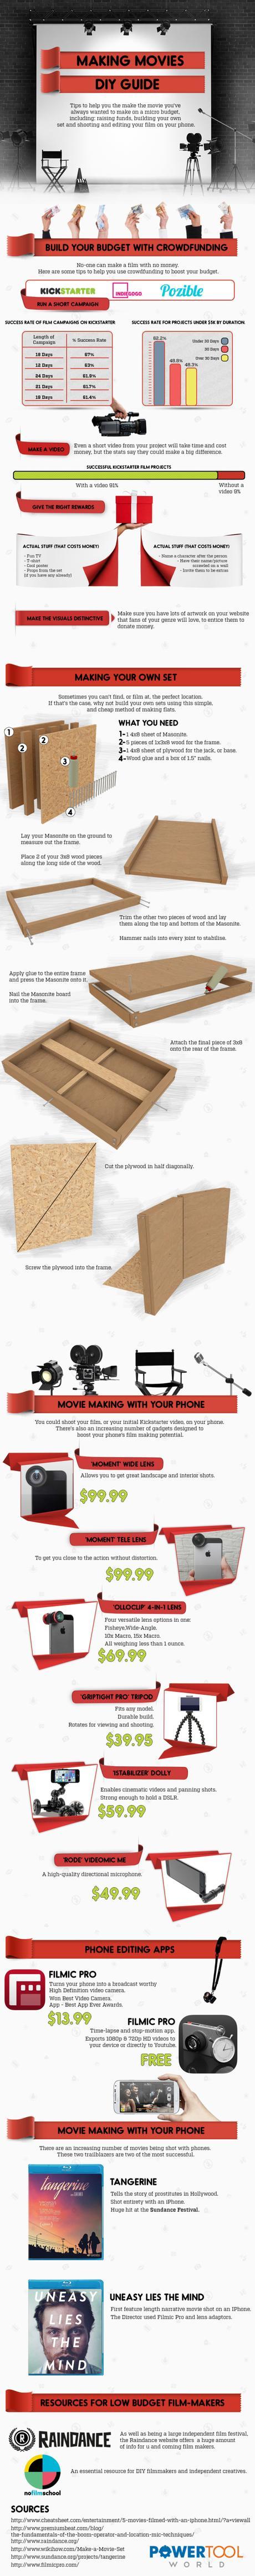 The DIY Guide to Making Movies in 2016 – An Infographic